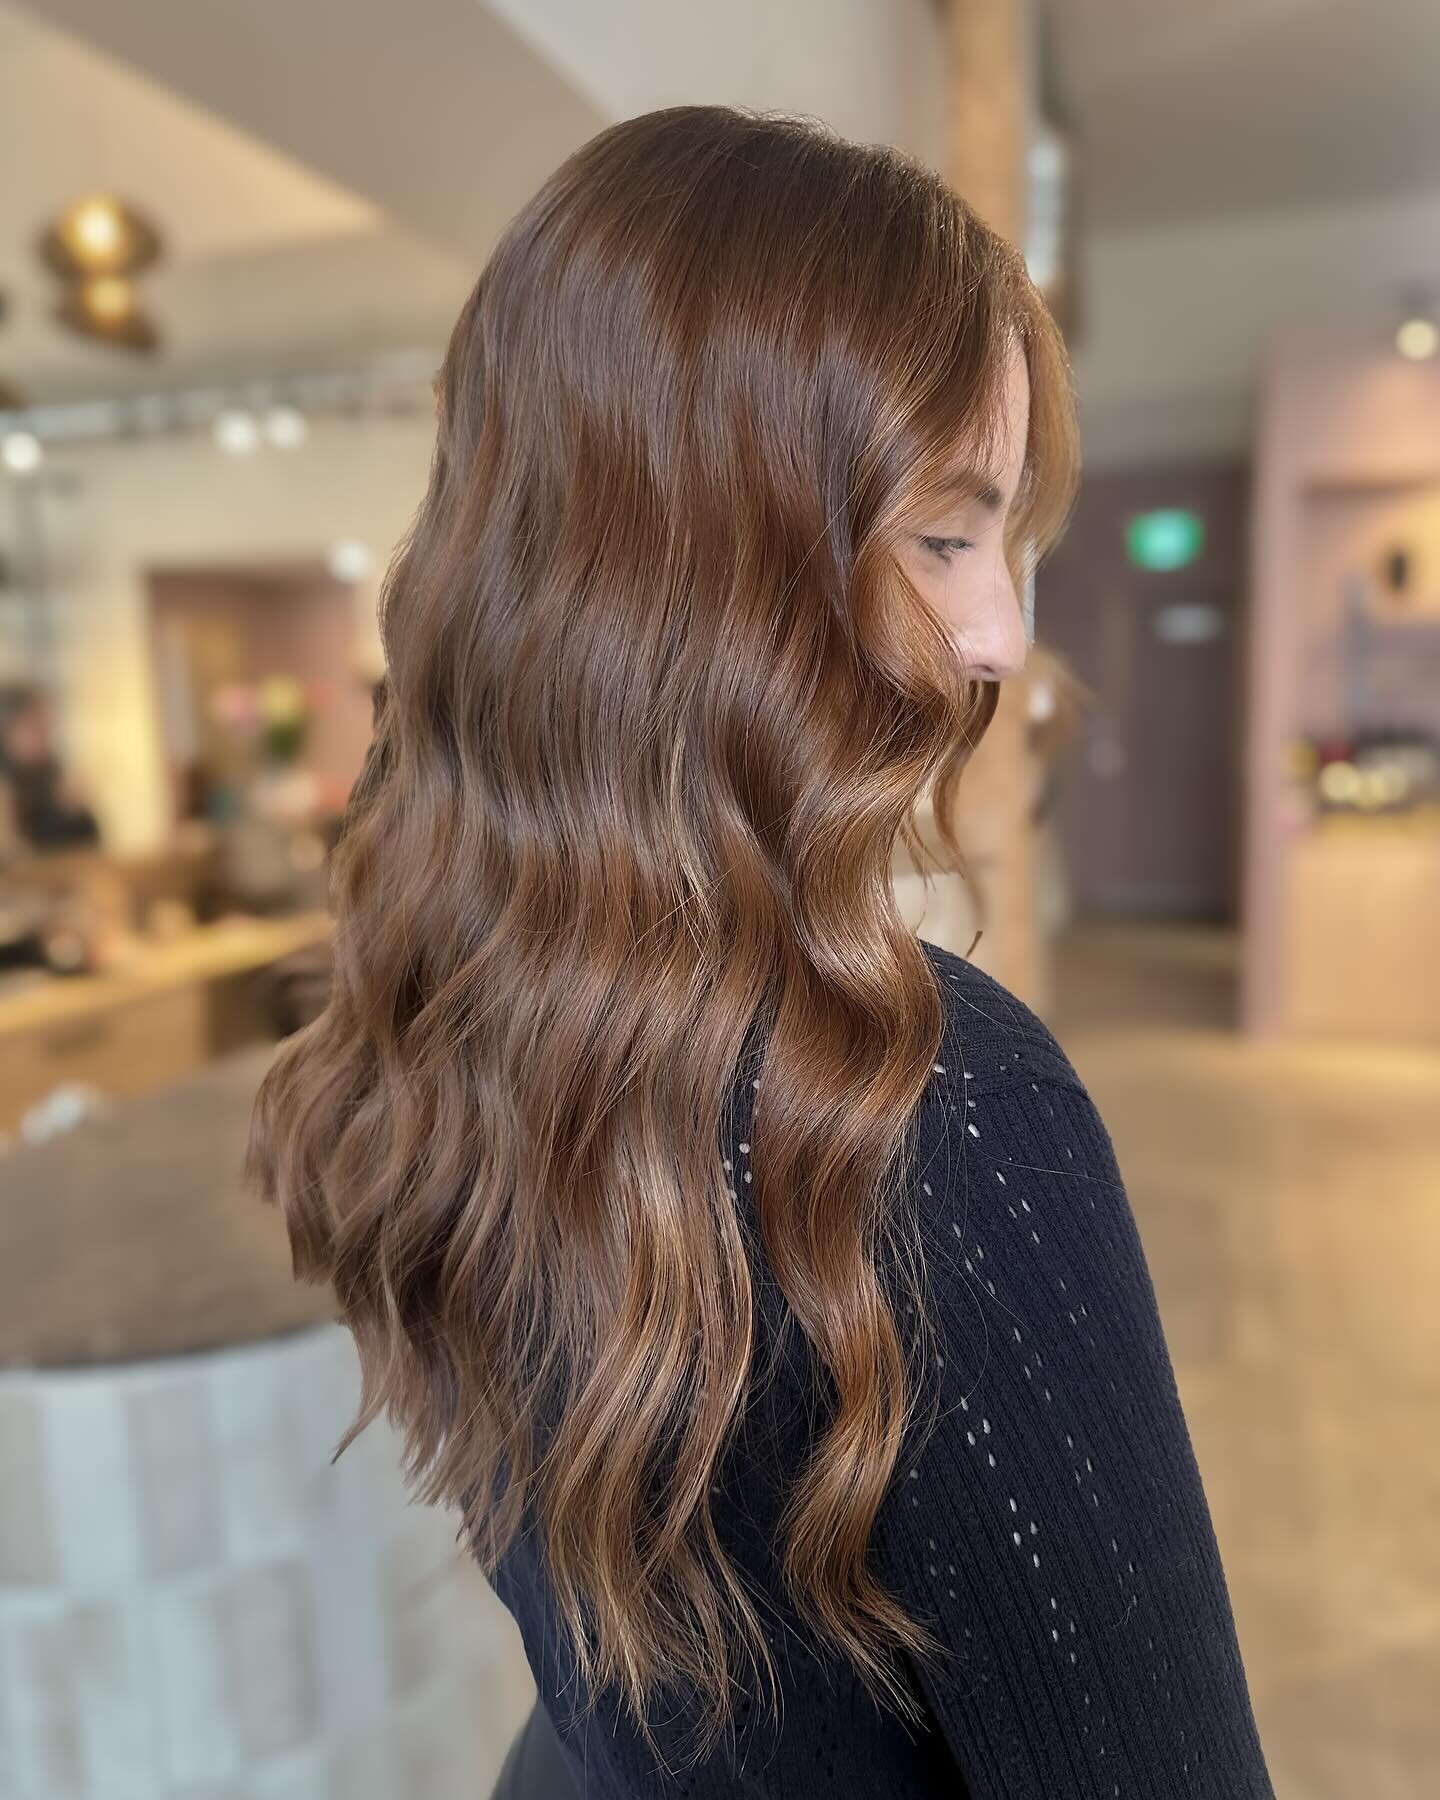 &ldquo;Our new favourite hair colour!&rdquo; We love the different warm tones mixed in her hair. If you have blue eyes and want to make them pop, why not try your complementary colour?  Swipe to see the before ➡️

Hair by @hair.byhayleyp 
Visit Hayle